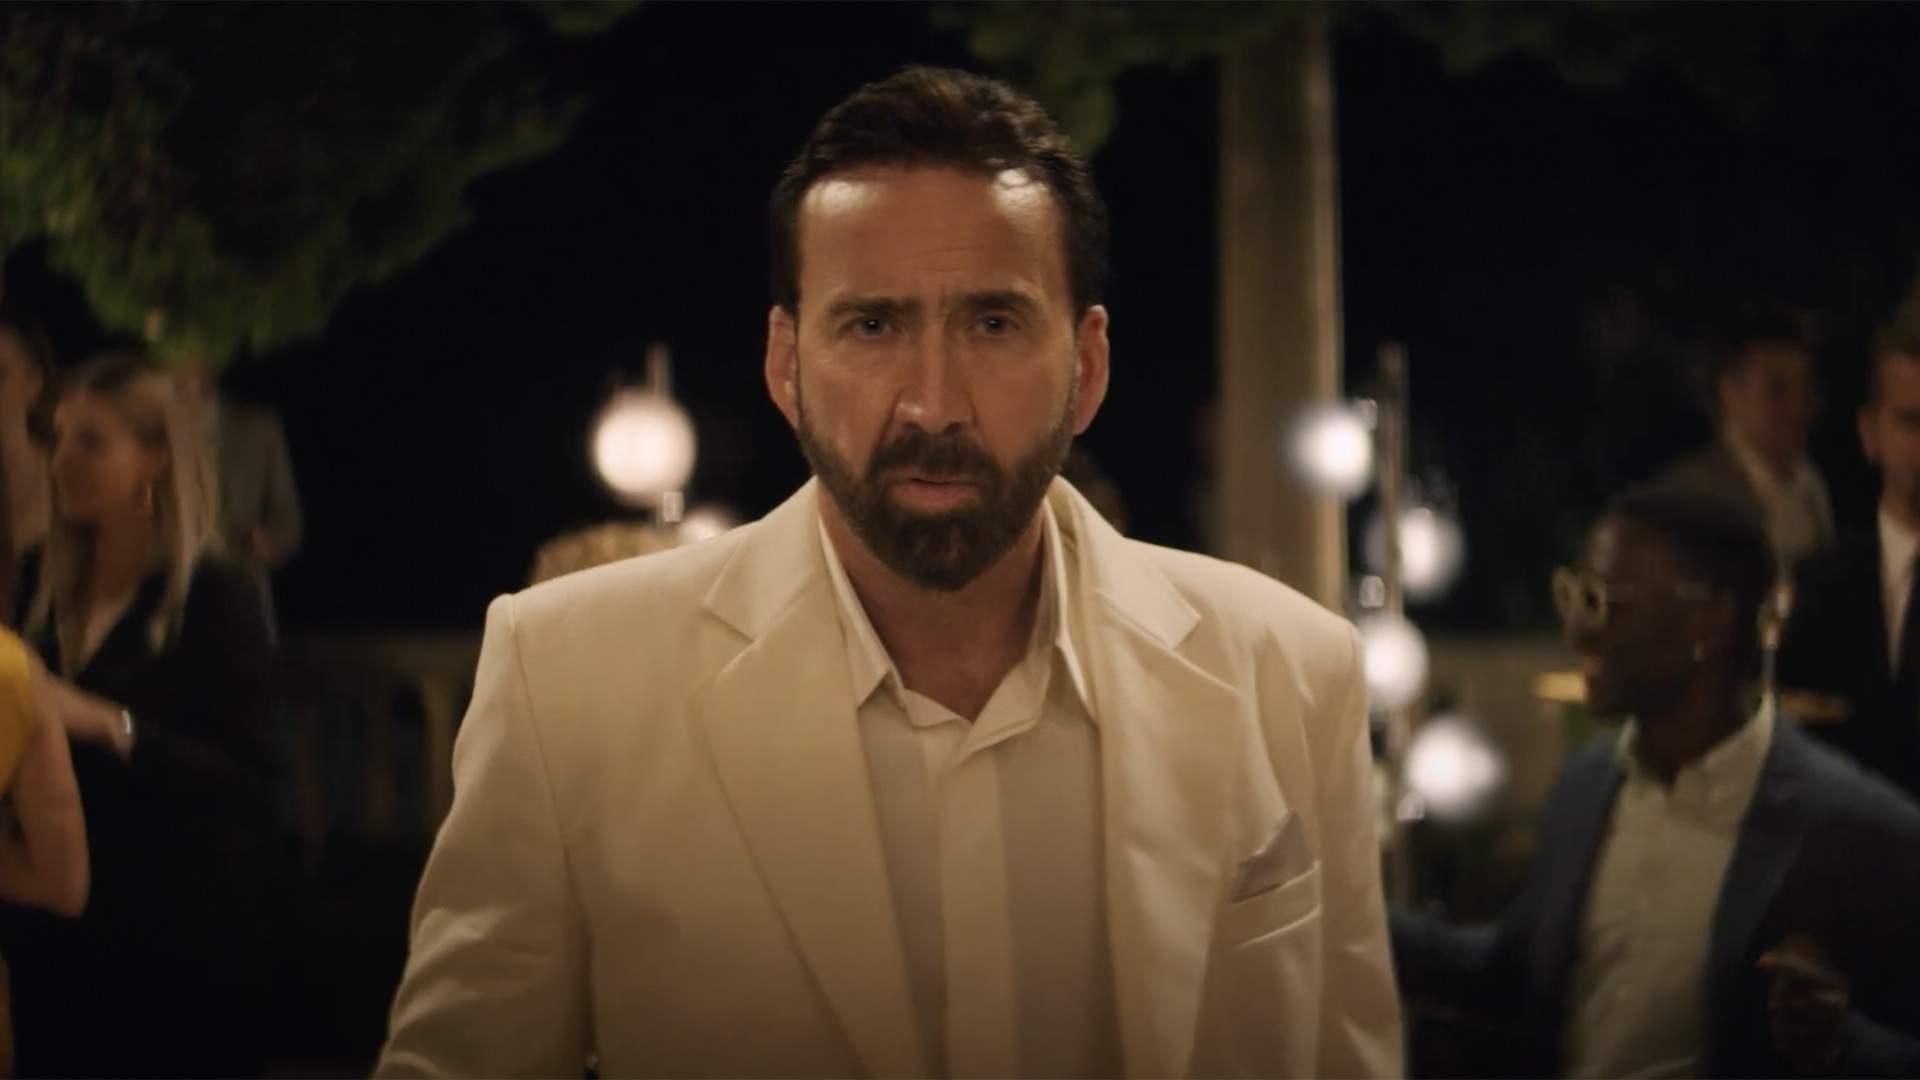 Nic Cage Is at His Most Nic Cage Yet in the New 'The Unbearable Weight of Massive Talent' Trailer